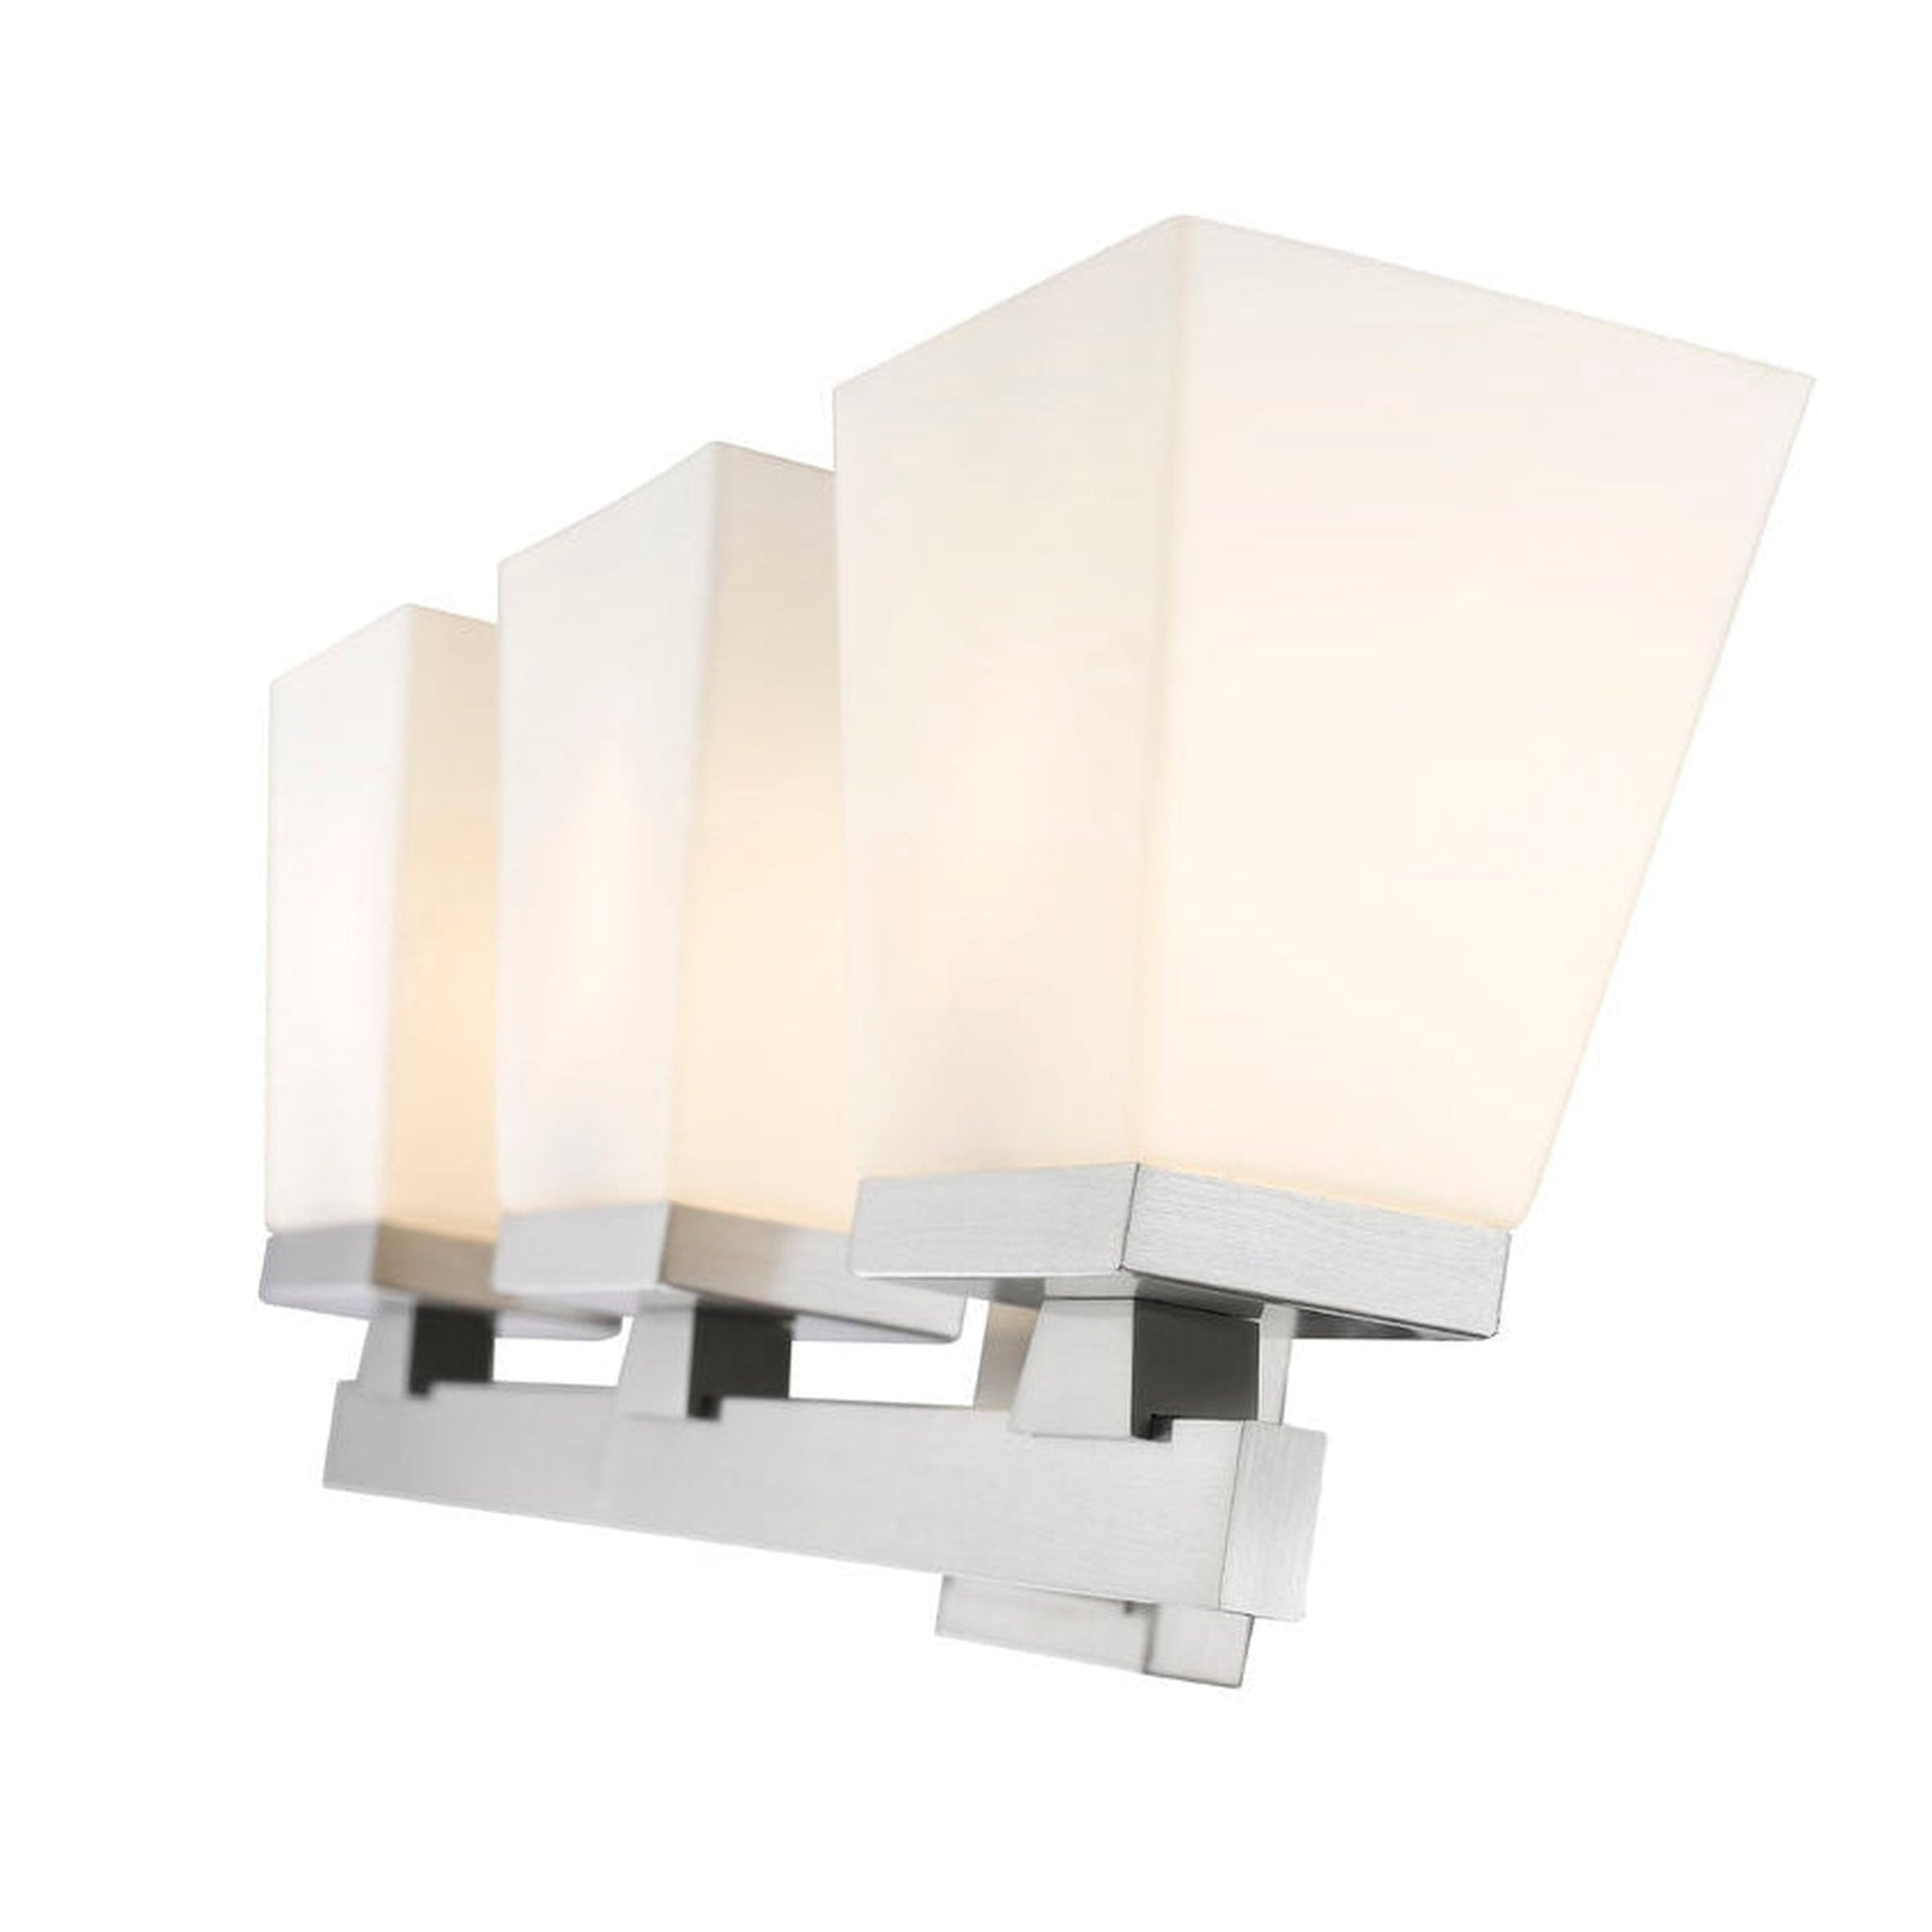 Z-Lite Astor 23" 3-Light Brushed Nickel Vanity Light With Etched Opal Glass Shade